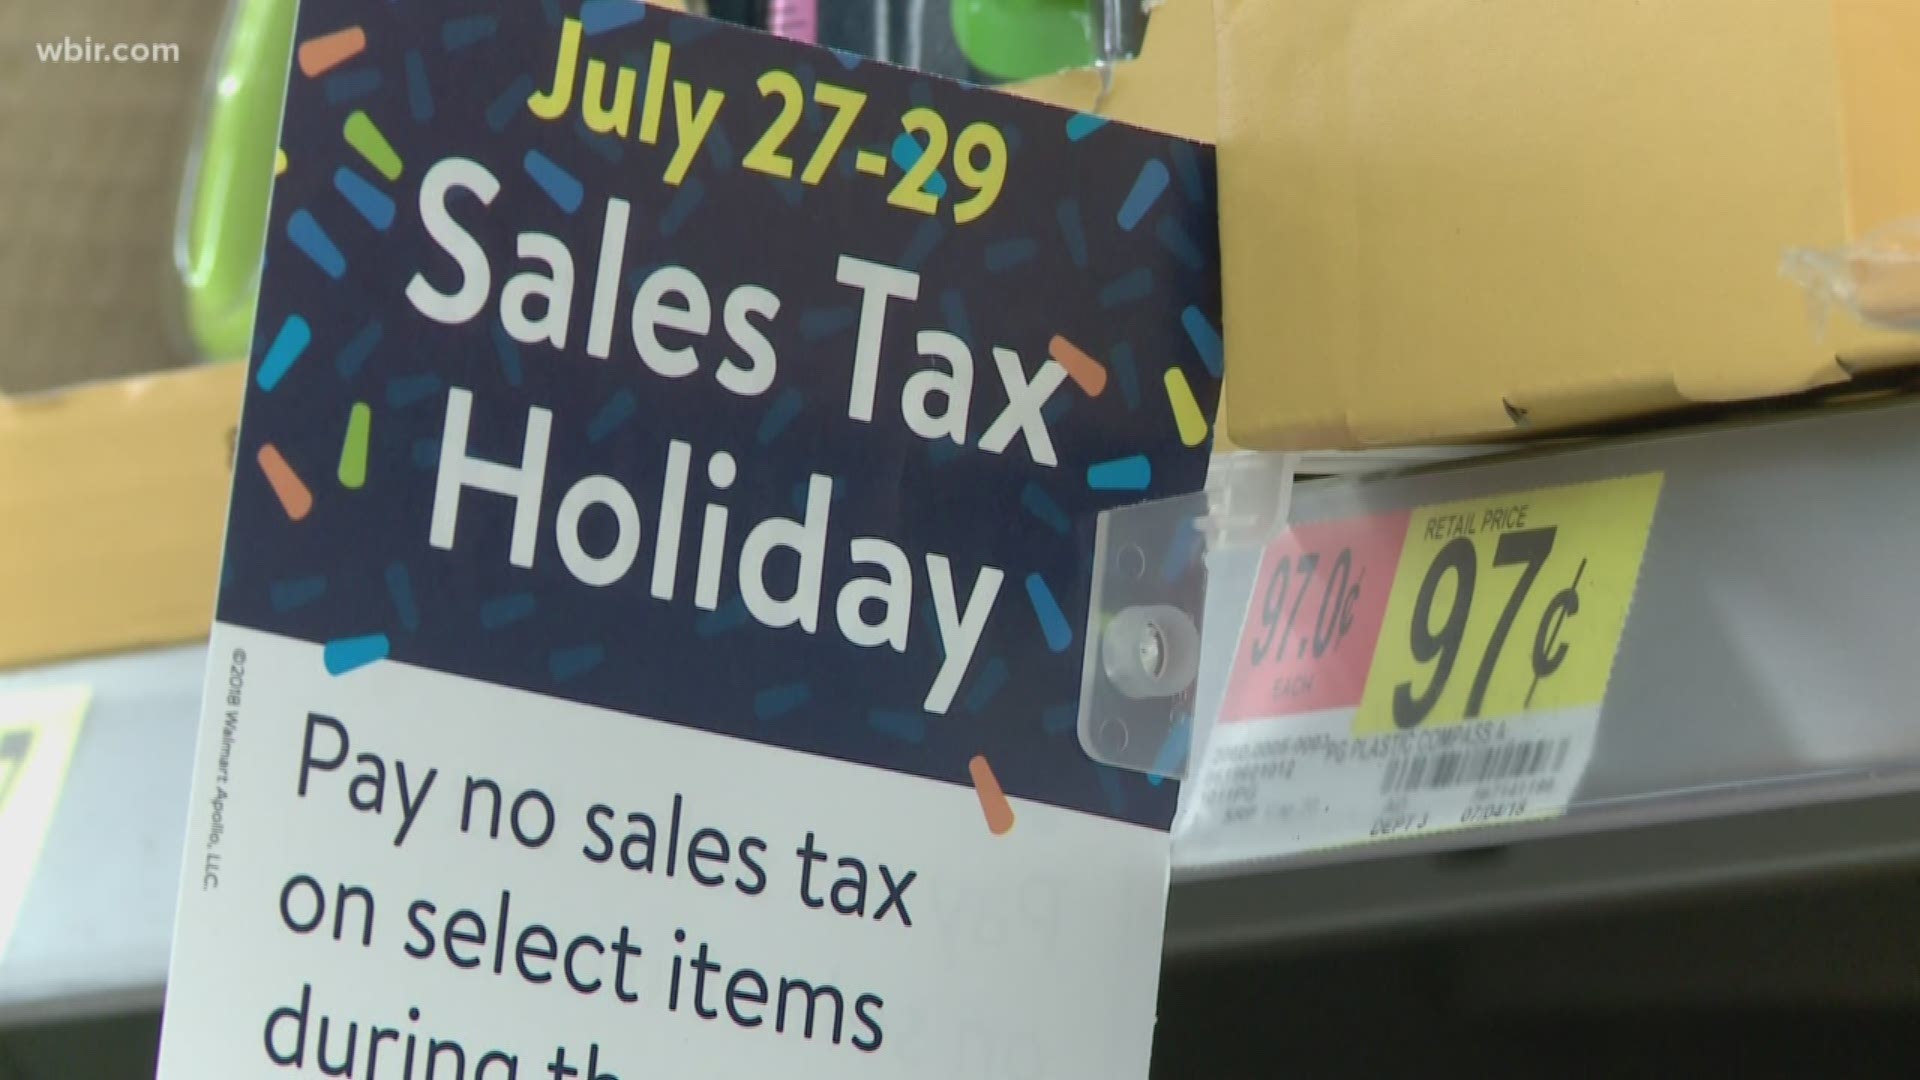 WBIR 10News Reporter Yvonne Thomas has a break down of what's included in the tax-free sales.

And while you're out getting your families school supplies, there's a great opportunity to help needy children in rural Appalachia as well.